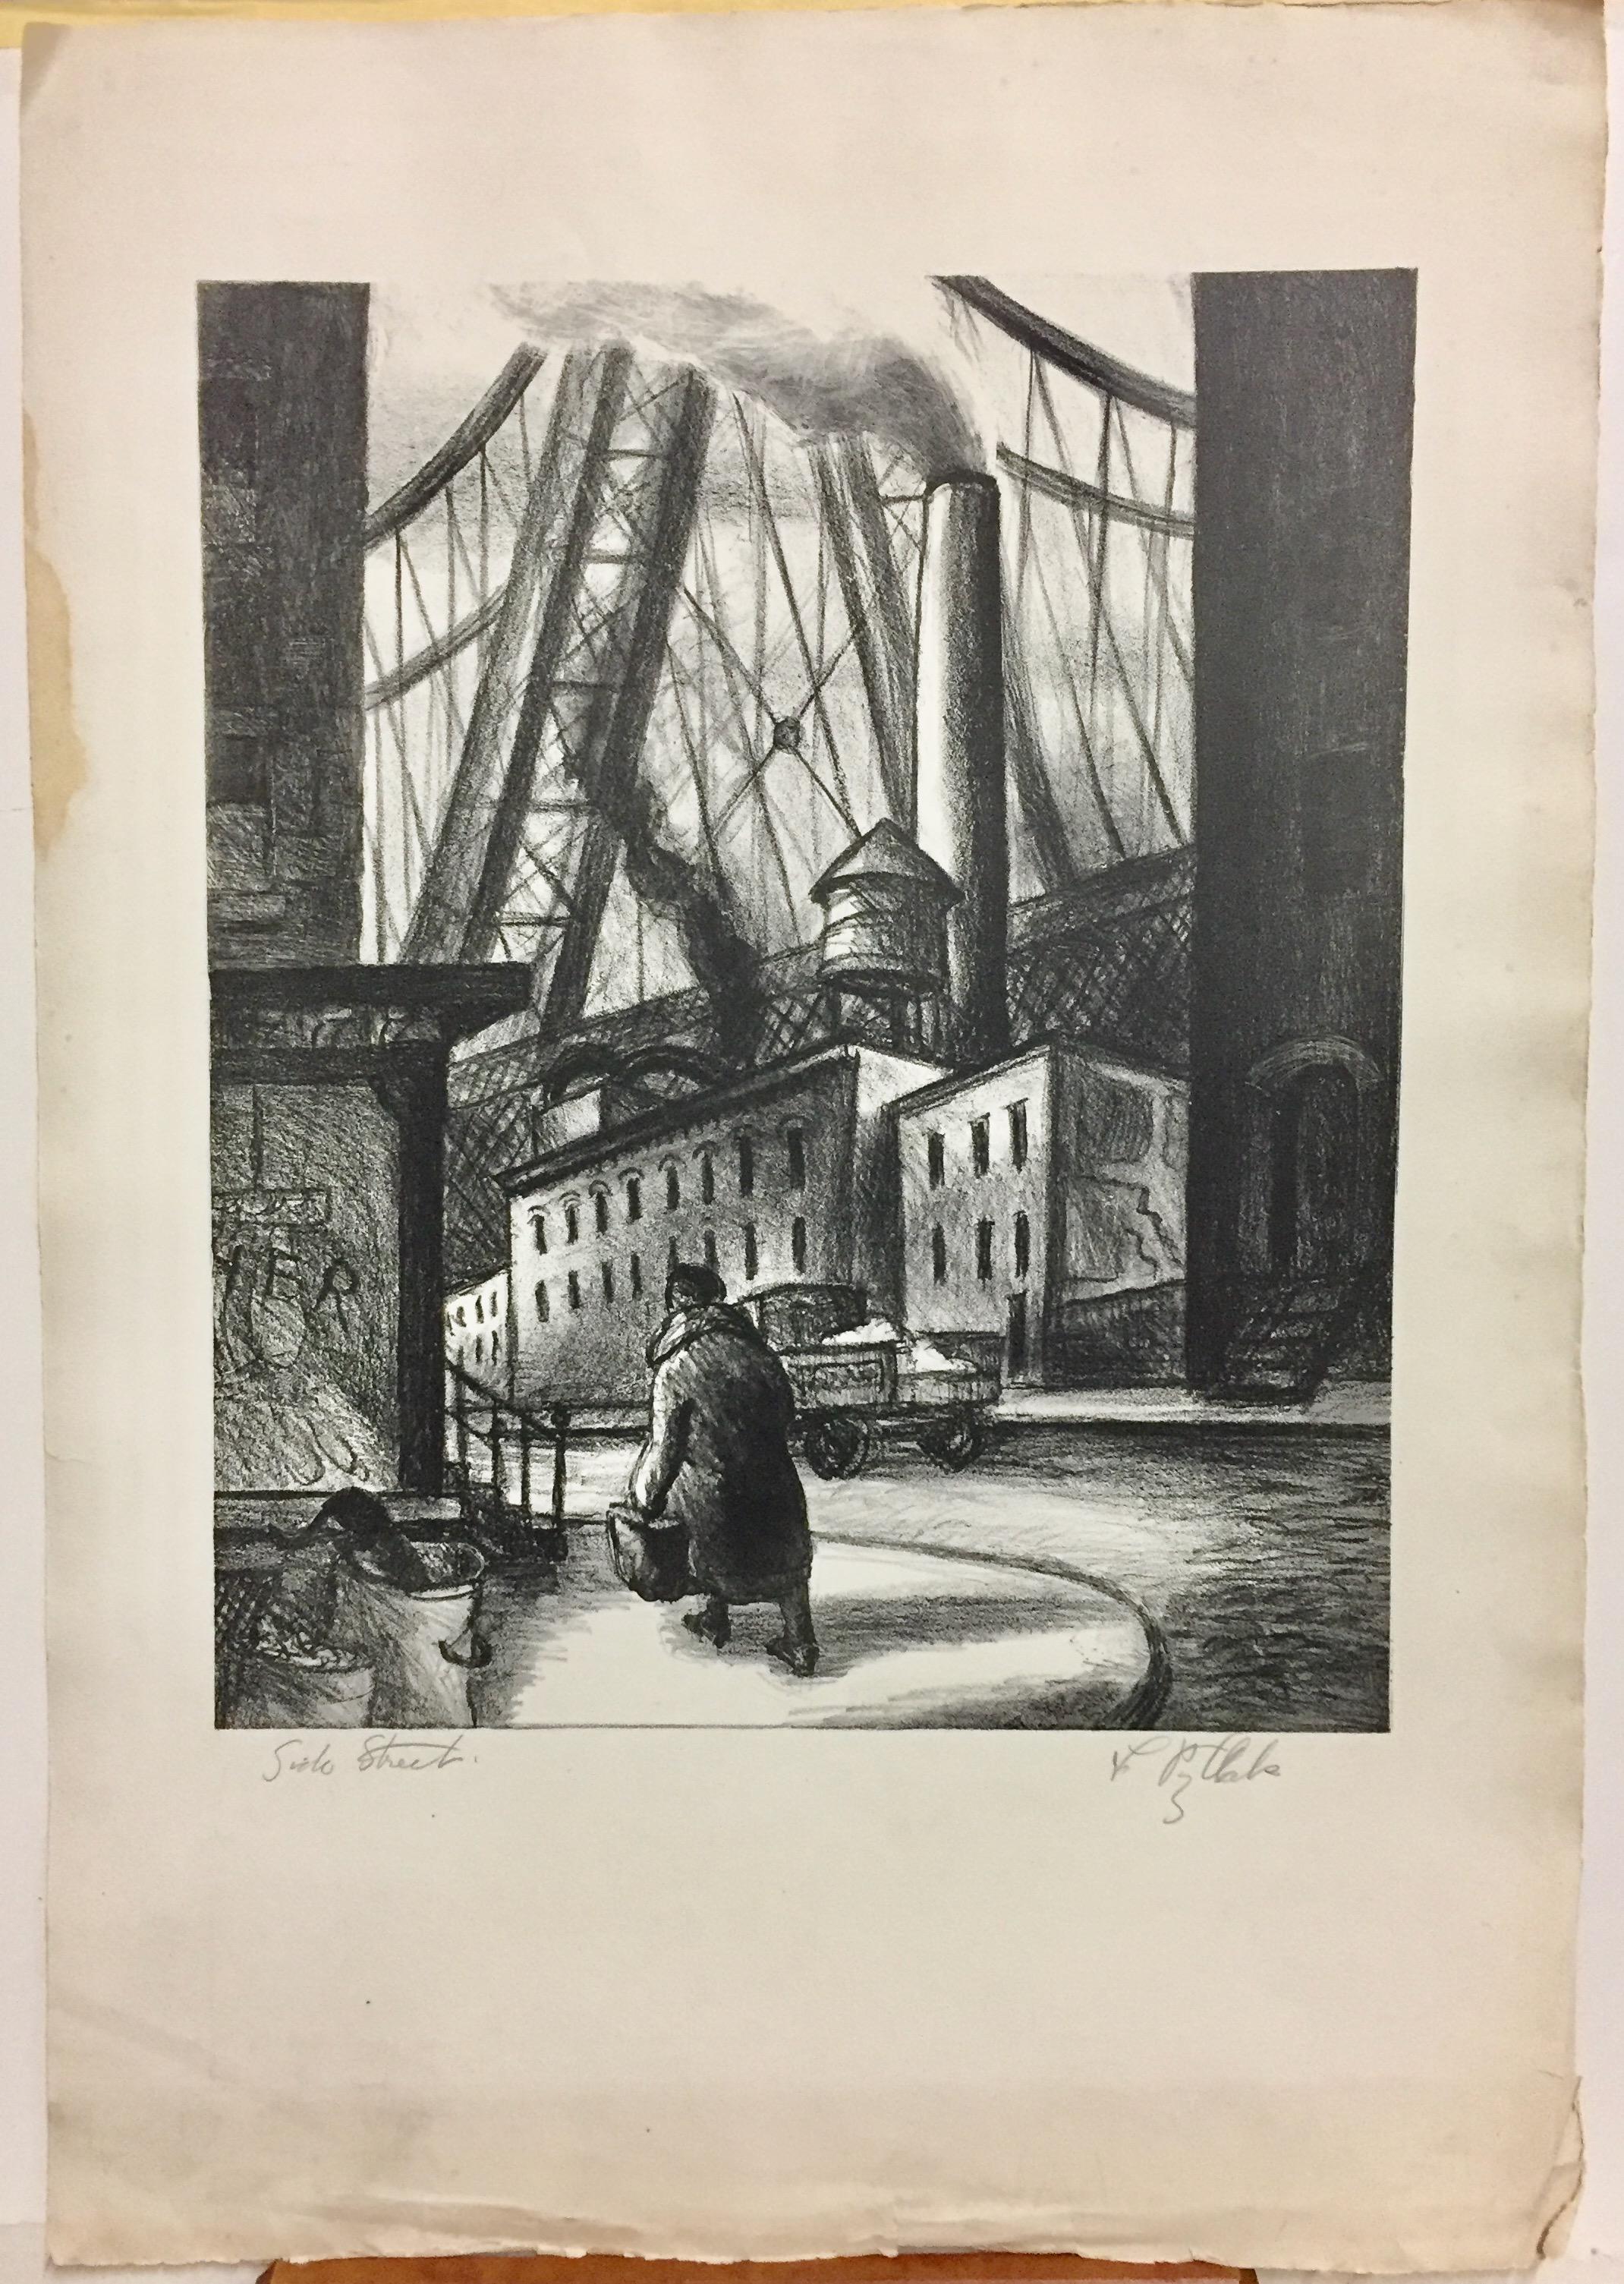 This lithograph is signed in pencil.

Leonard Pytlak lived on the East Side of Manhattan and this image recalls the 59th Street Bridge (also known as the Queensboro Bridge and the Ed Koch Queensboro Bridge), completed in 1909. It goes from Manhattan